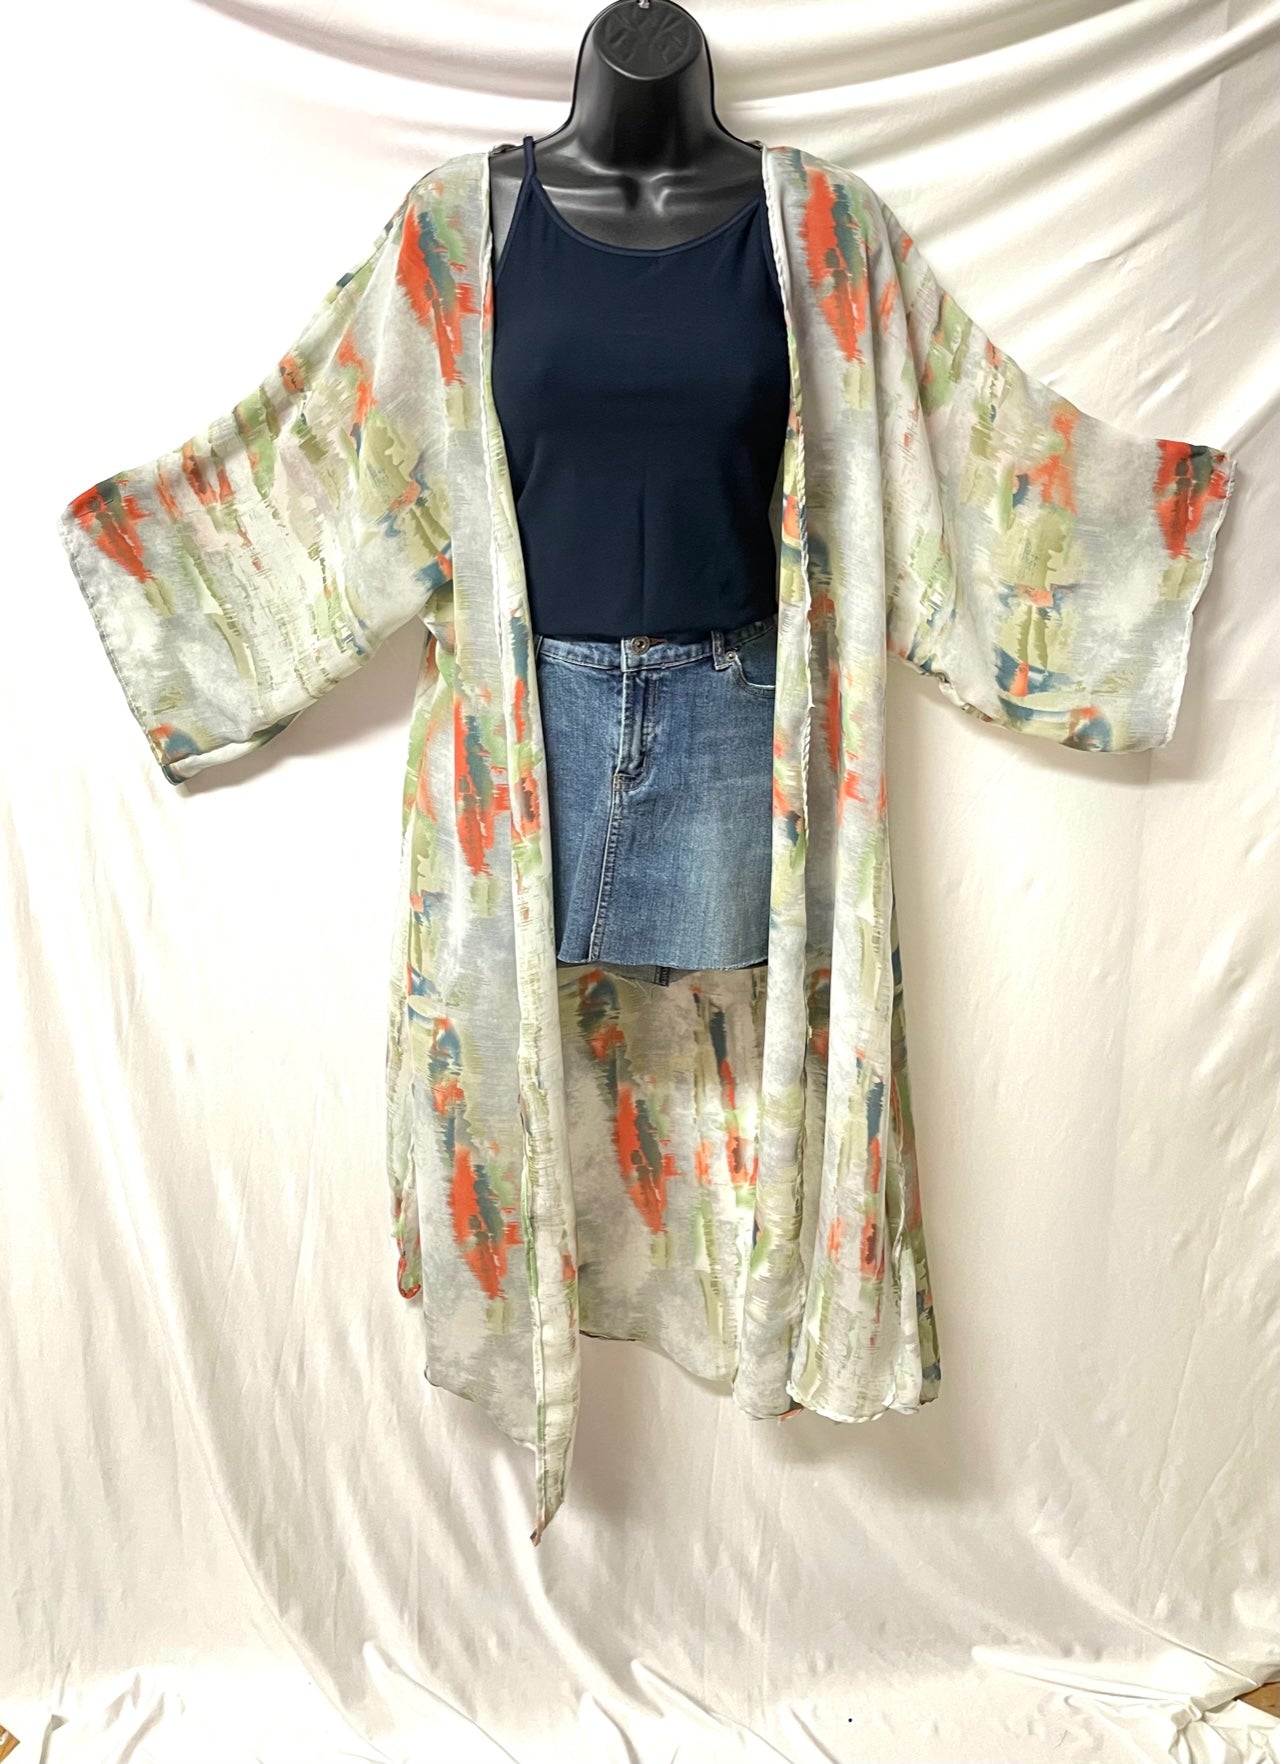 Full body robe, robe style, kimono style, summer style, summer fashion, spring summer, semi sheer, abstract, pull over, women fashion, chic